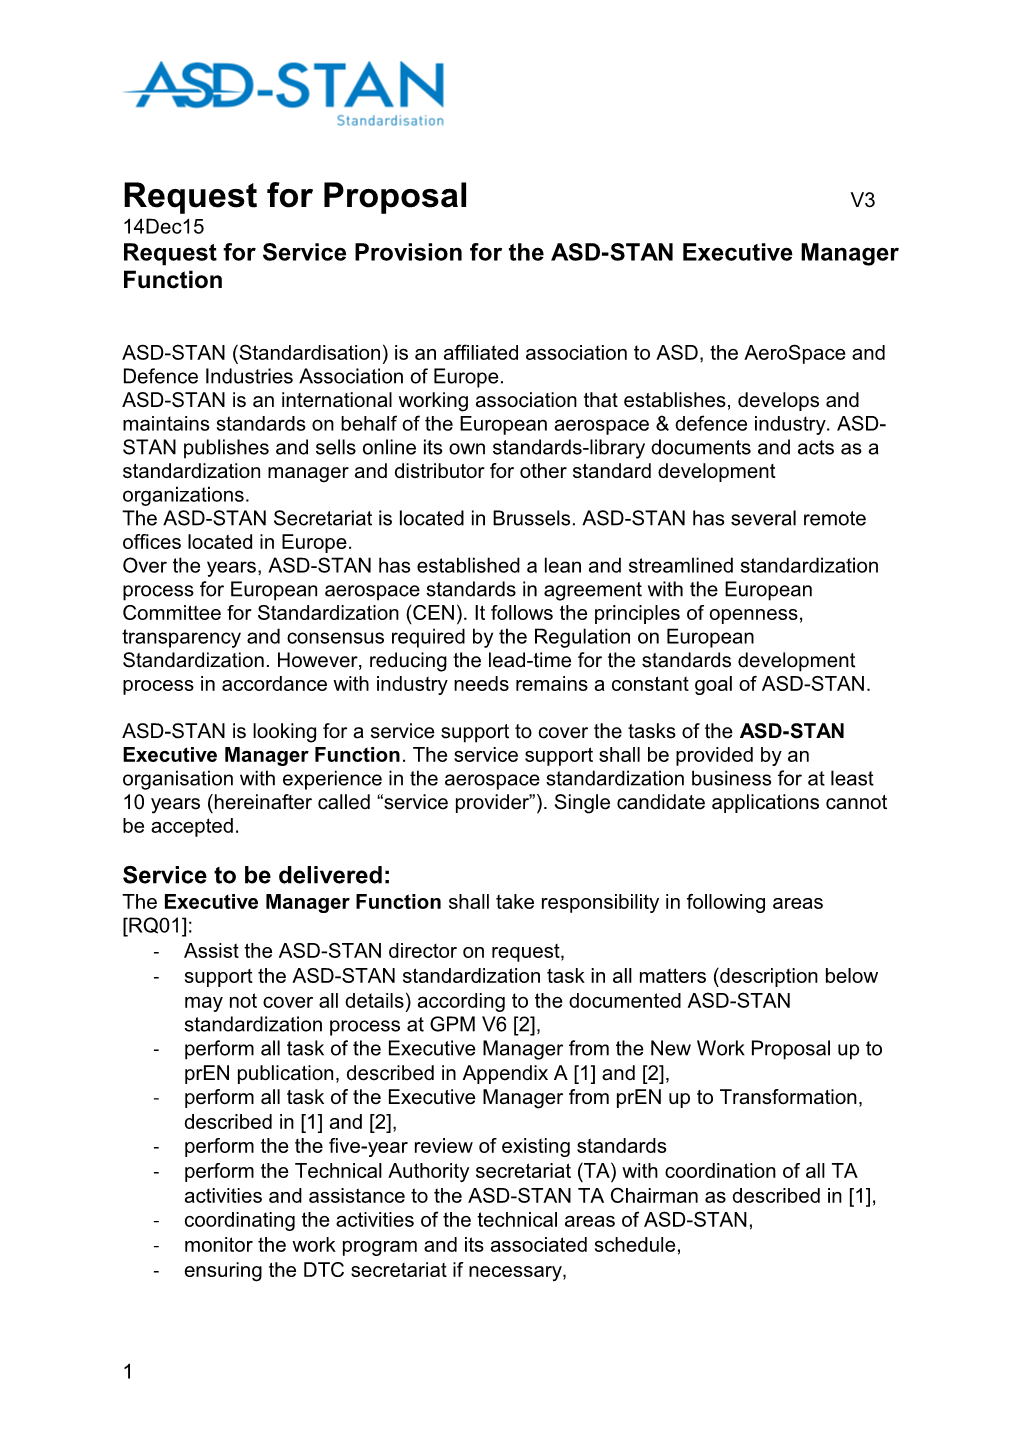 Request for Service Provision for the ASD-STAN Executive Manager Function